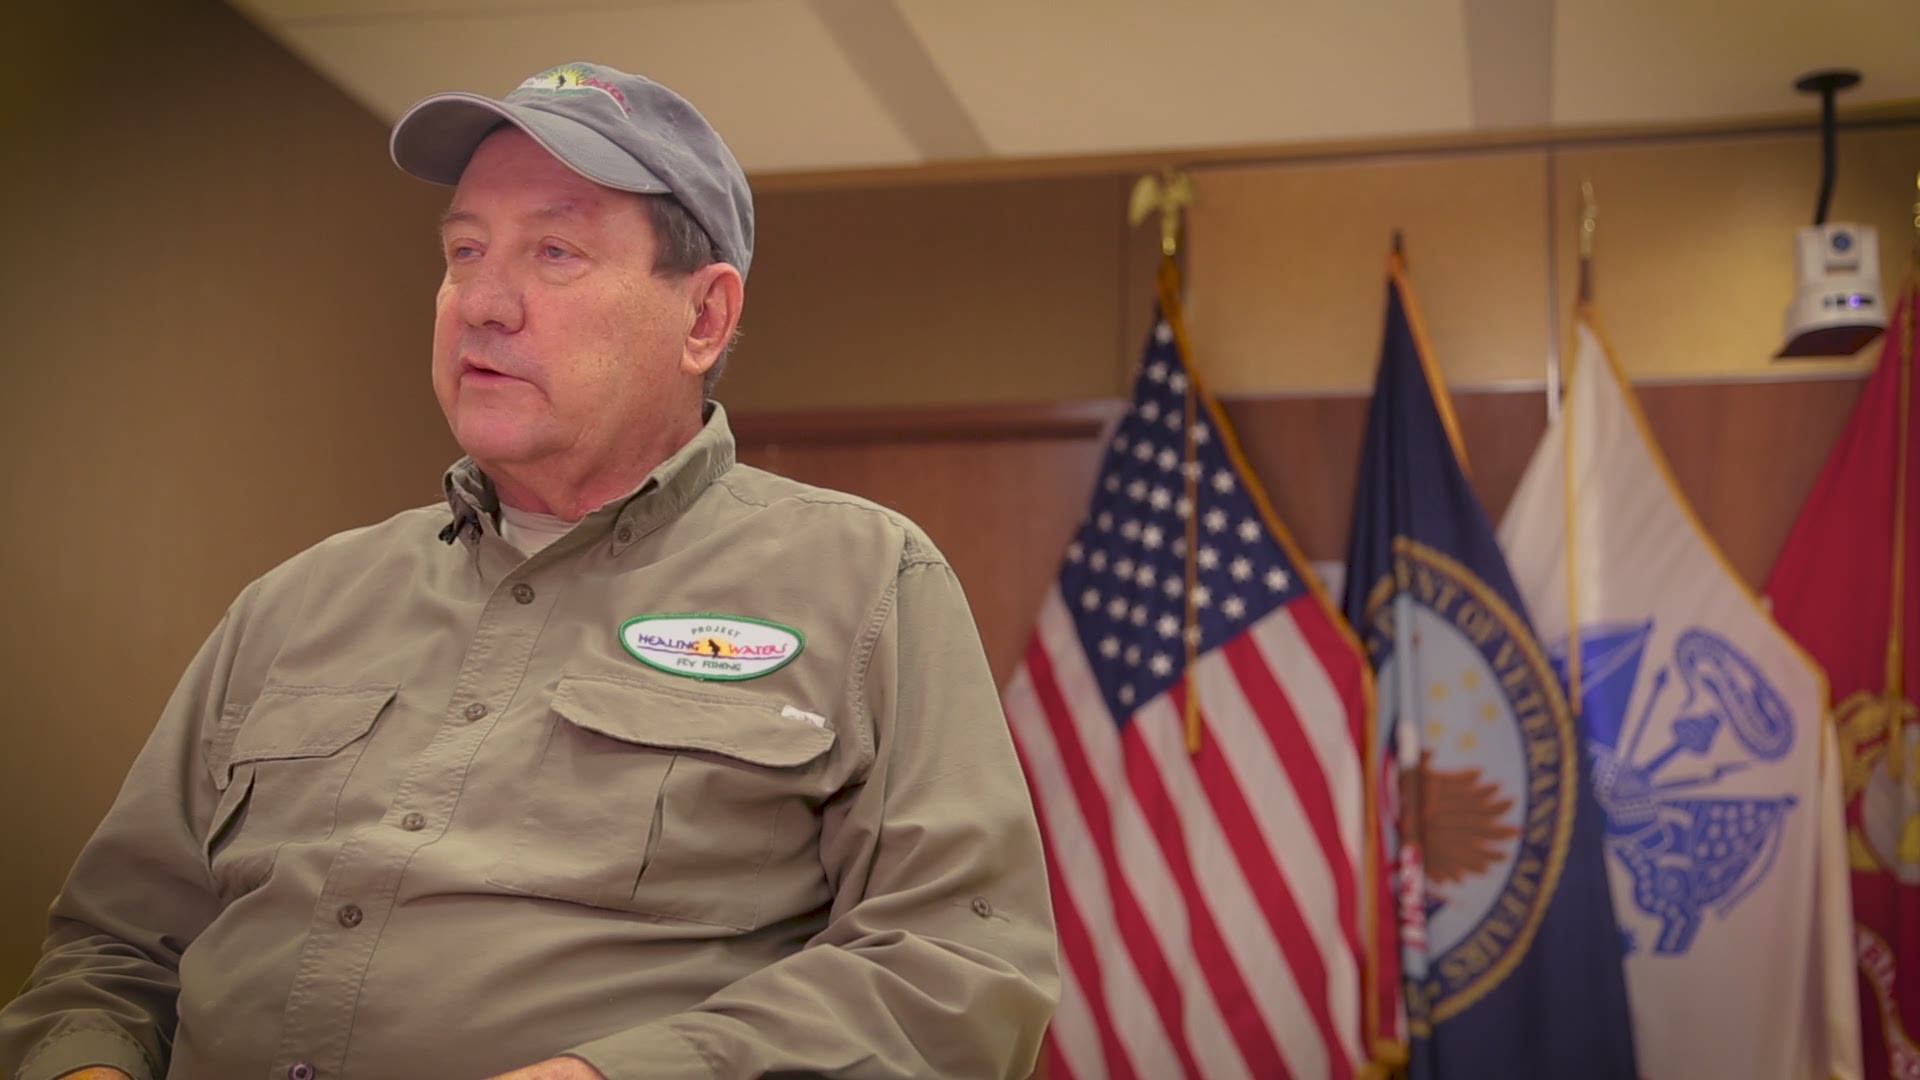 A longtime Northeast Ohio fishing guide, Monte is using his passing for fly fishing to help veterans adjust to life off the battlefield and being back at home.